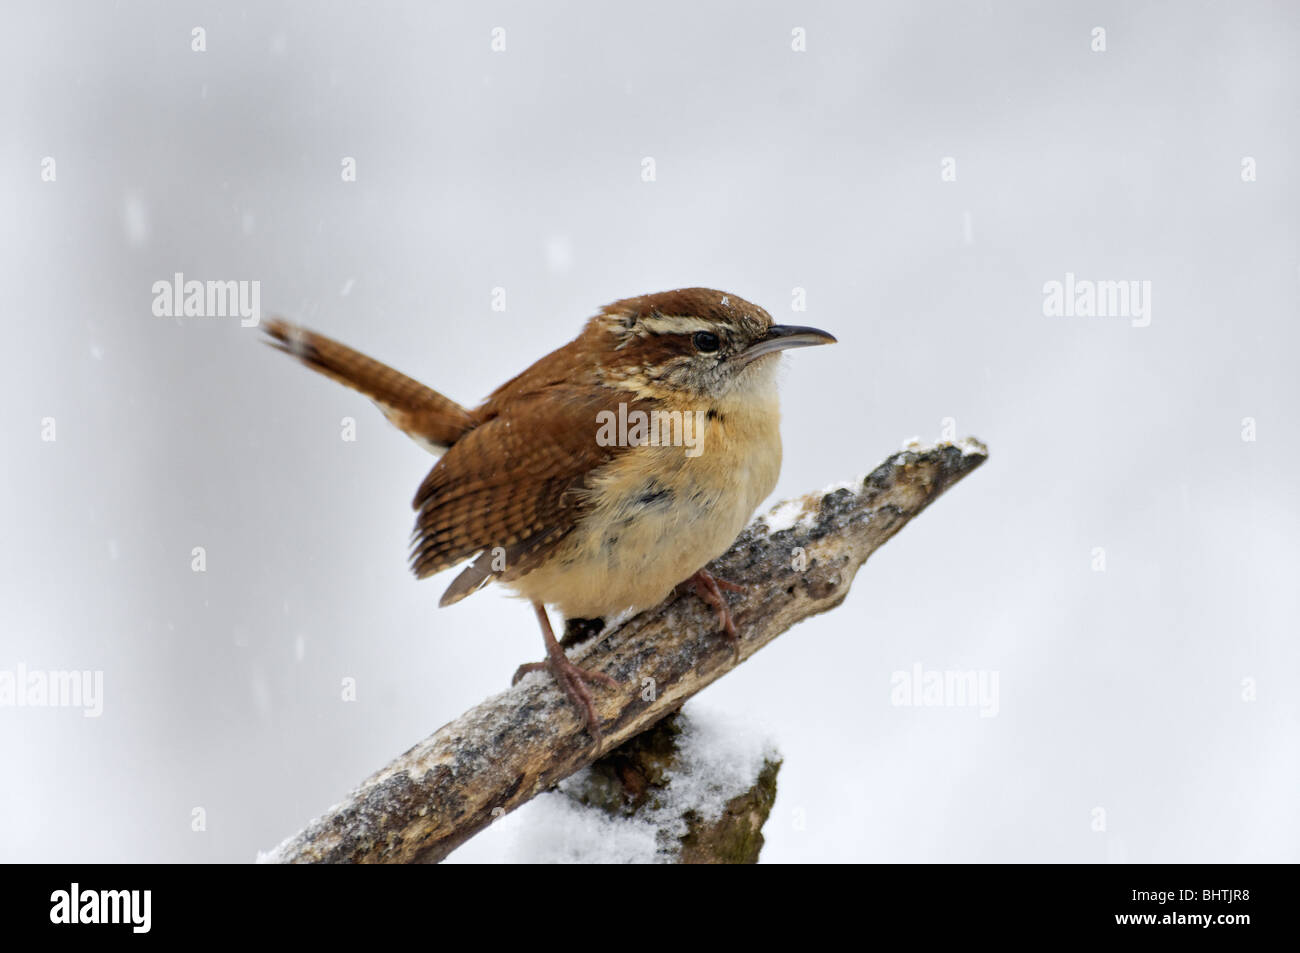 Carolina Wren Perched on Branch in Snow Stock Photo